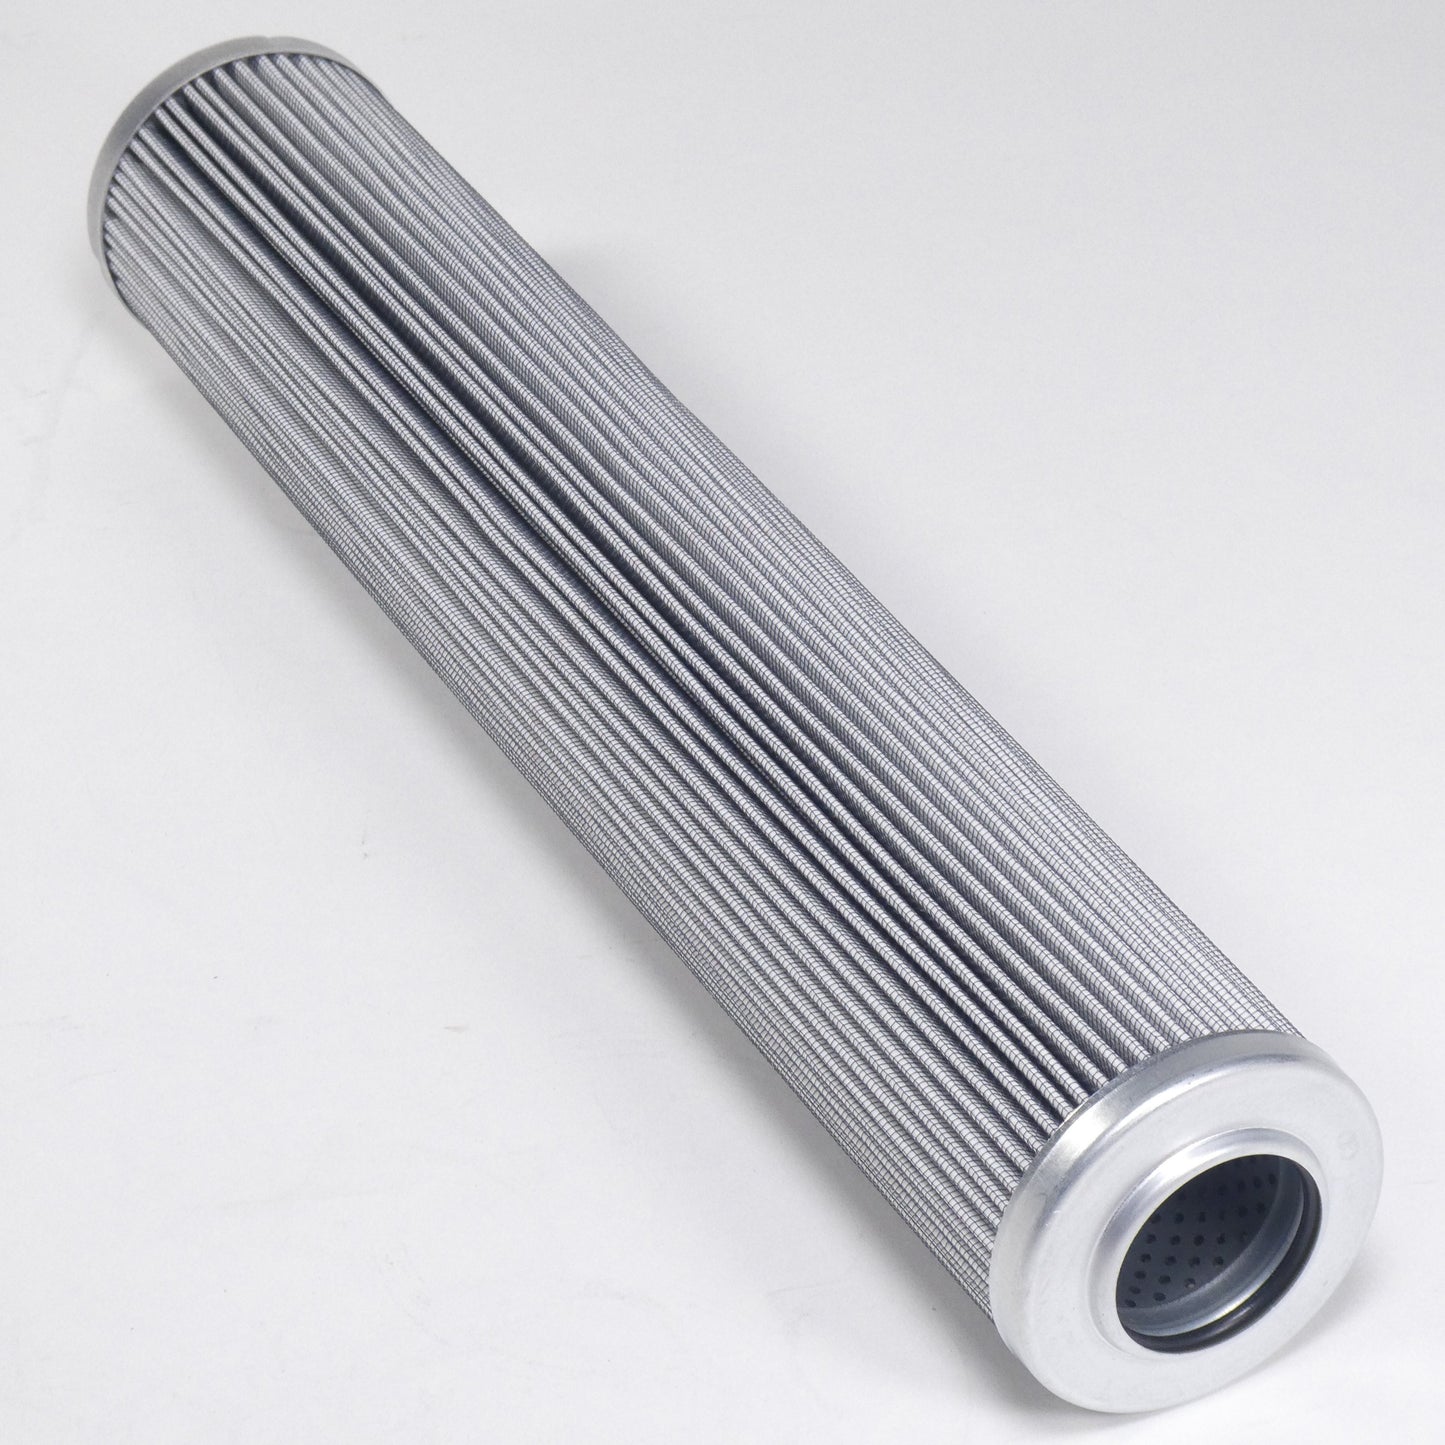 Hydrafil Replacement Filter Element for Pall HC9600FMN16H